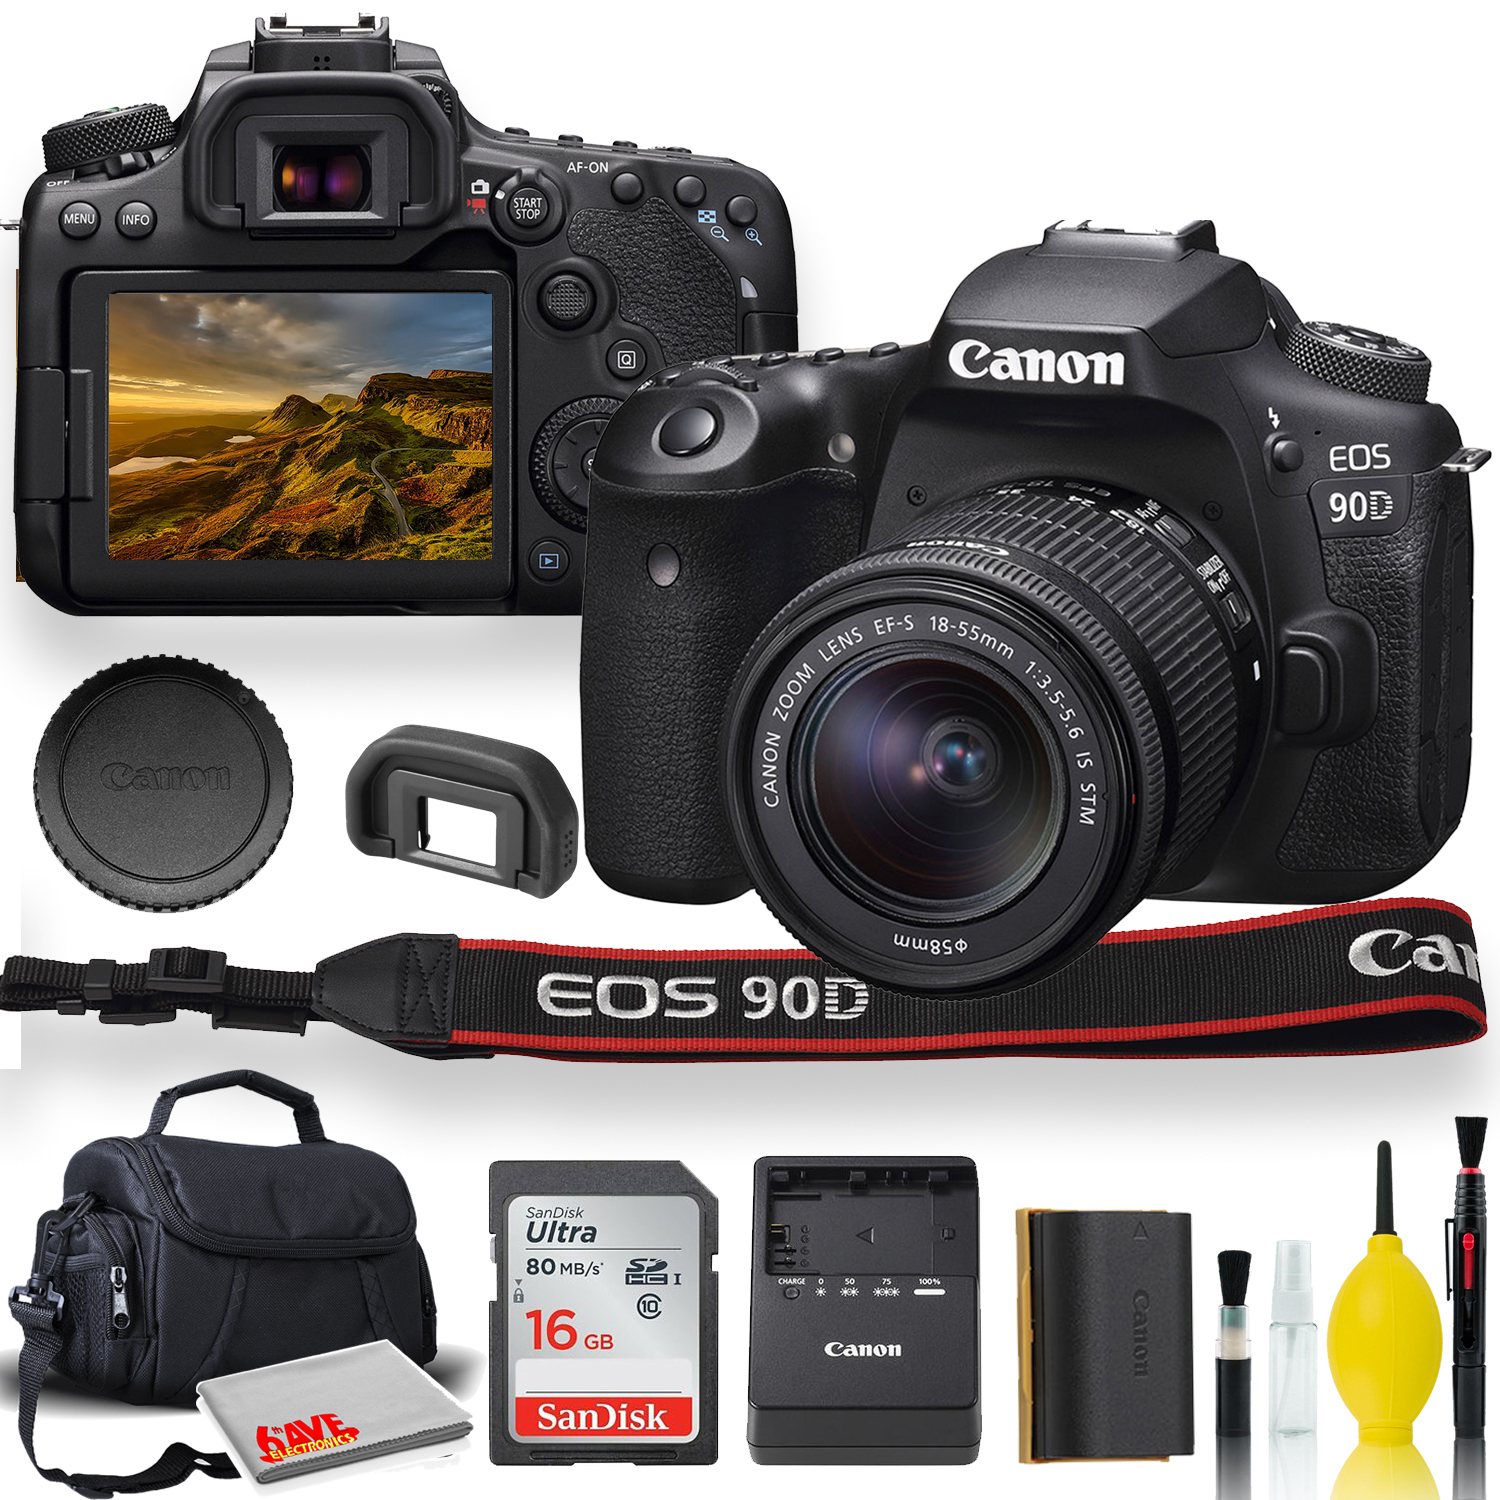 Canon EOS 90D DSLR Camera With 18-55mm Lens, Padded Case, Memory Card, and More  - Starter Bundle Set (International Model) - image 1 of 6